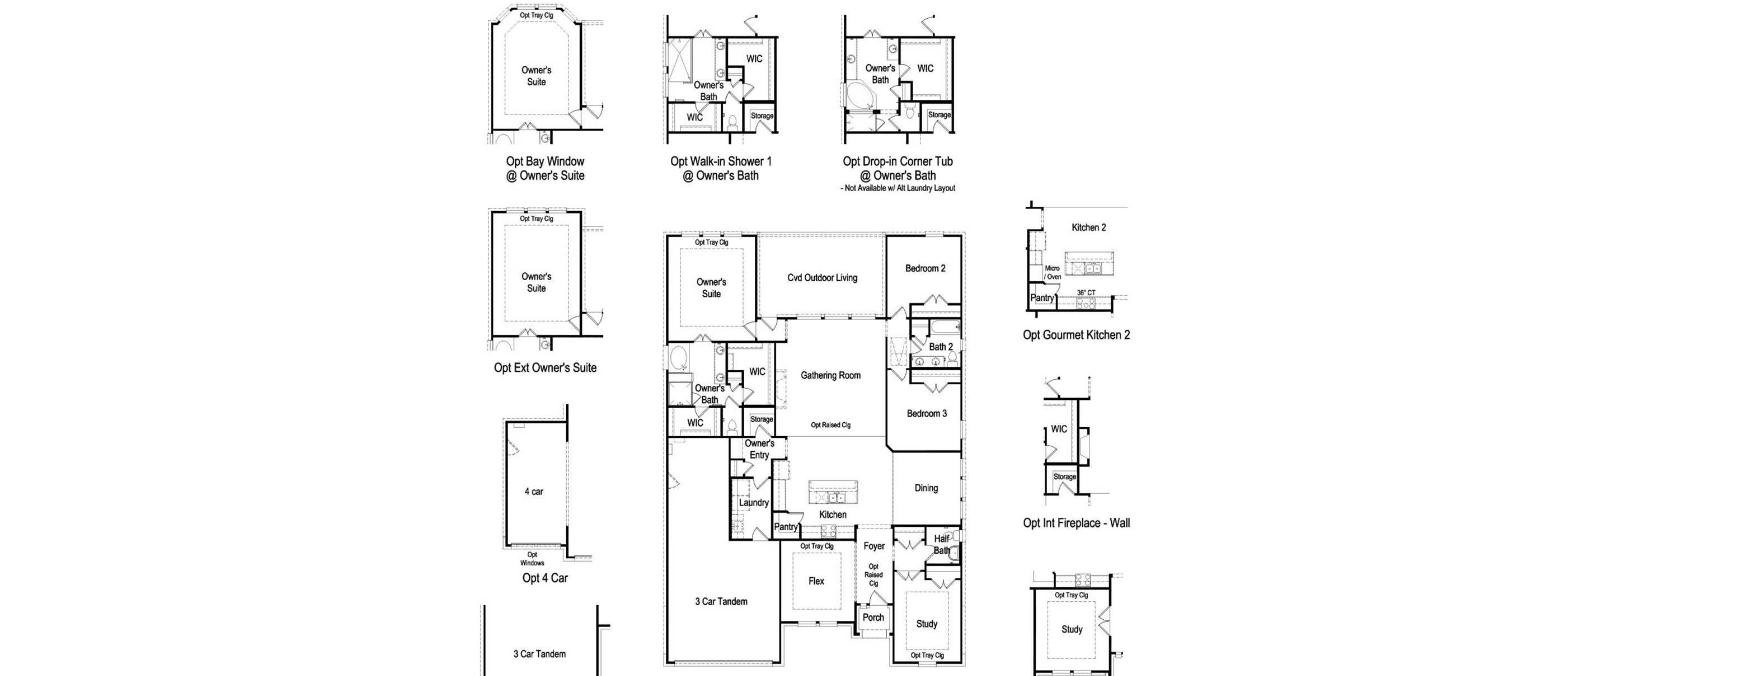 Pewter Plan by Taylor Morrison Floor Plan Friday Marr